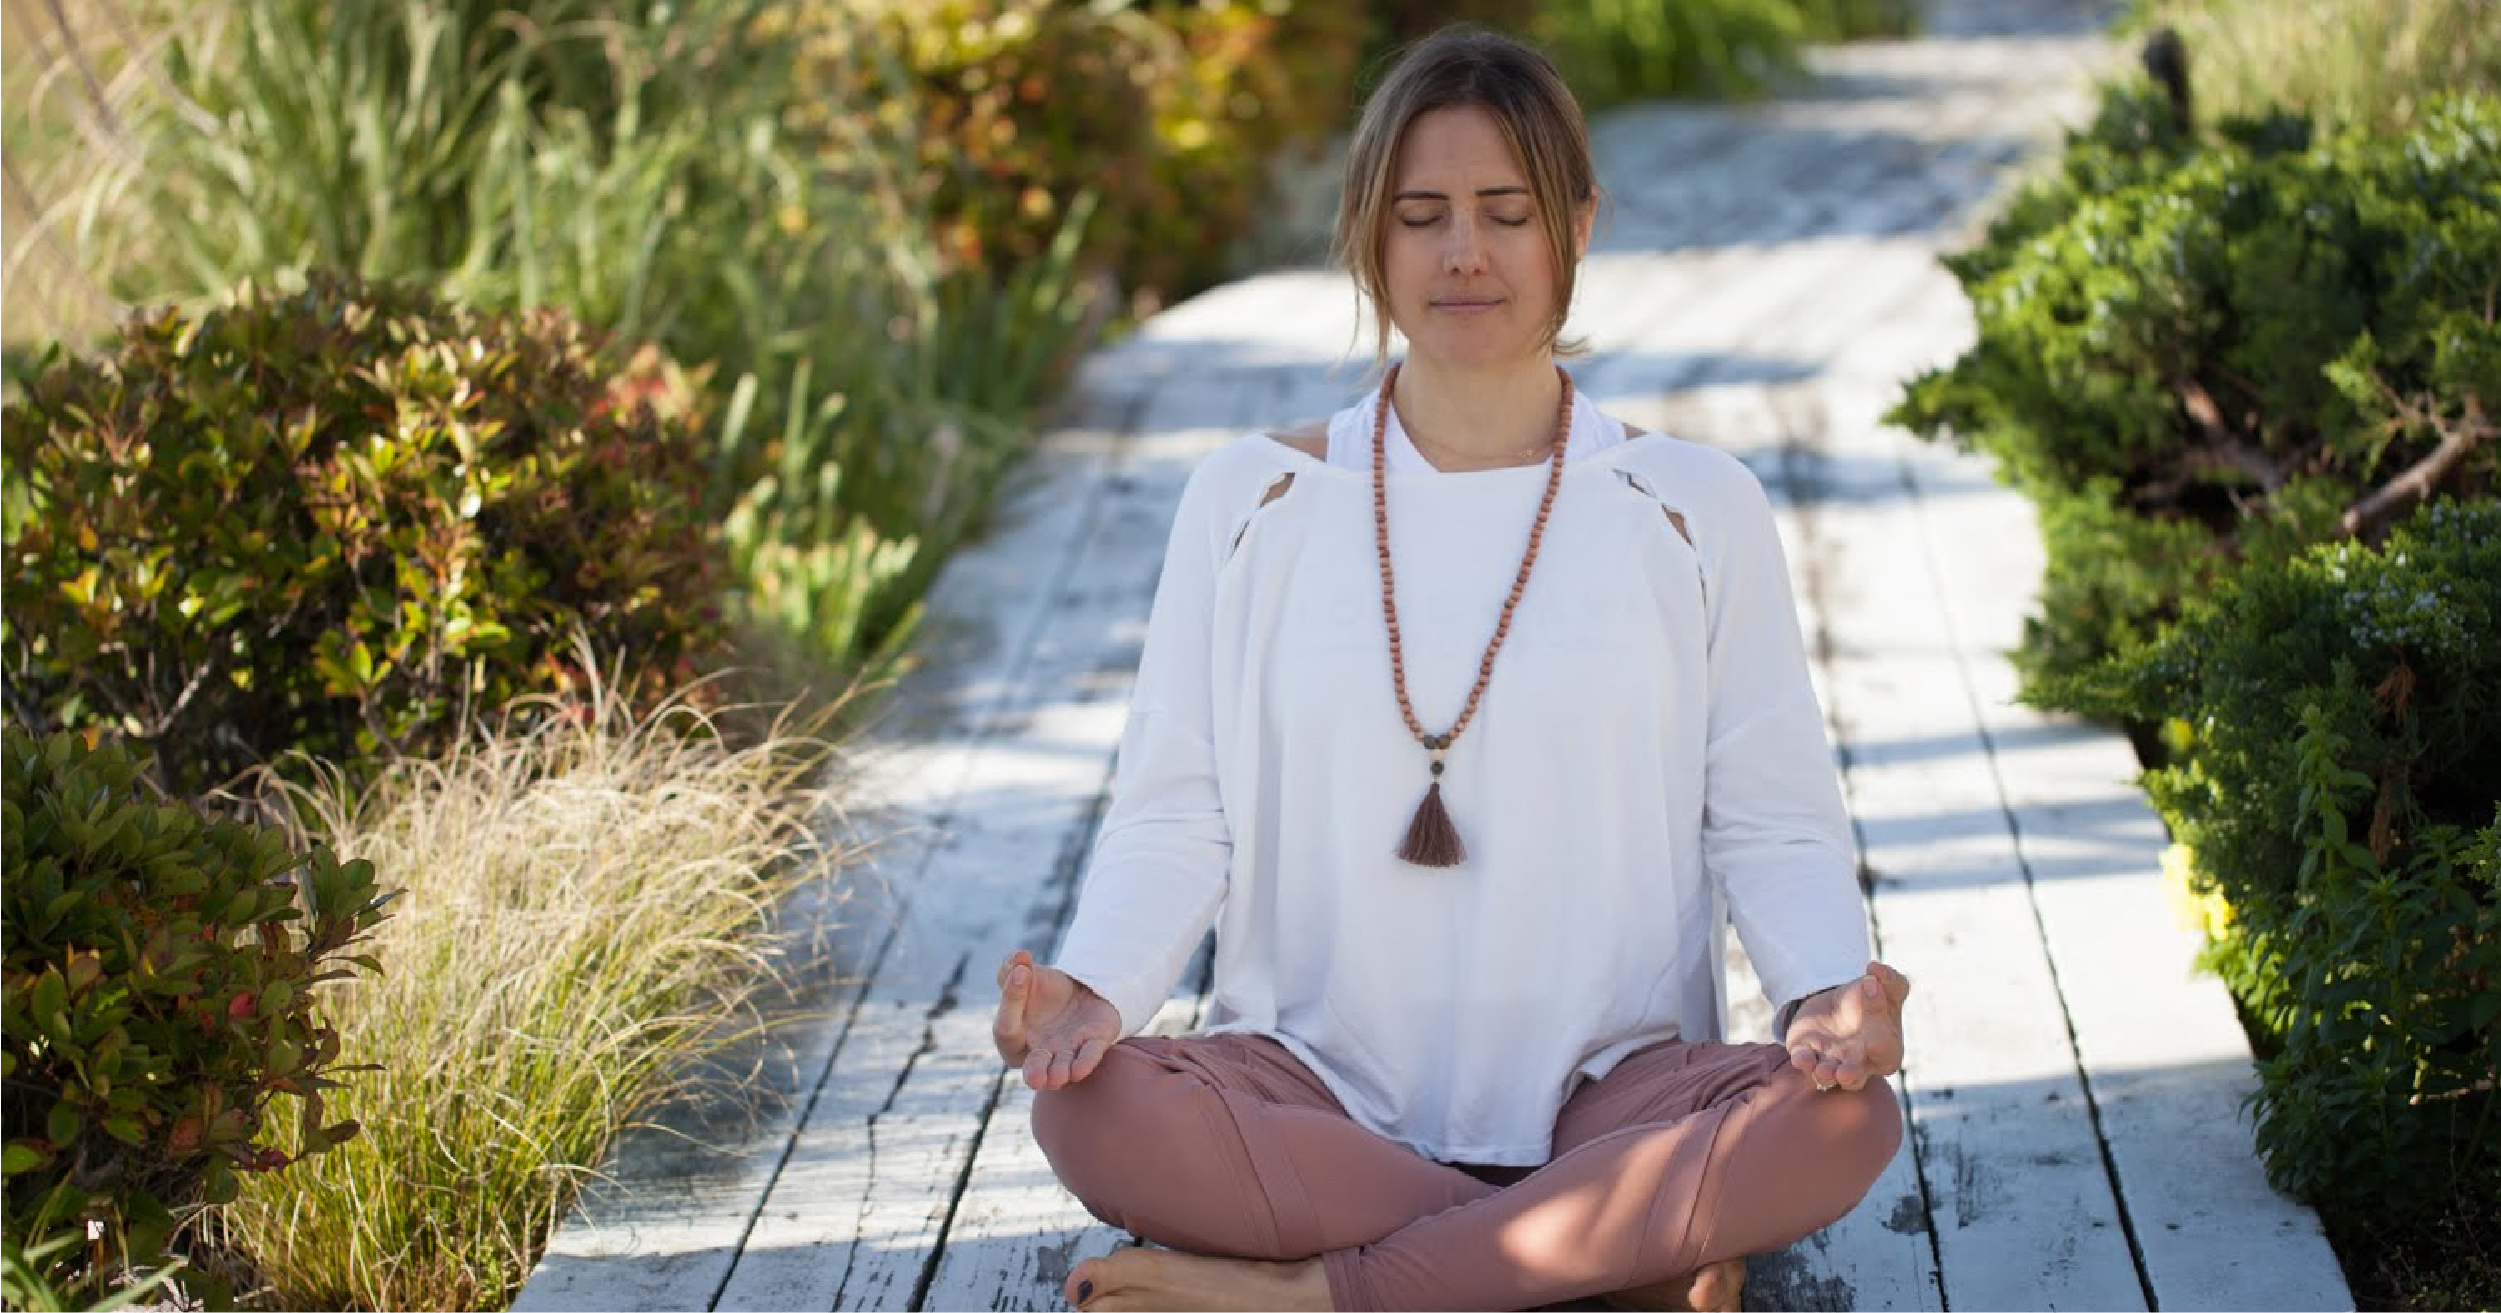 Meditation for Stress Relief